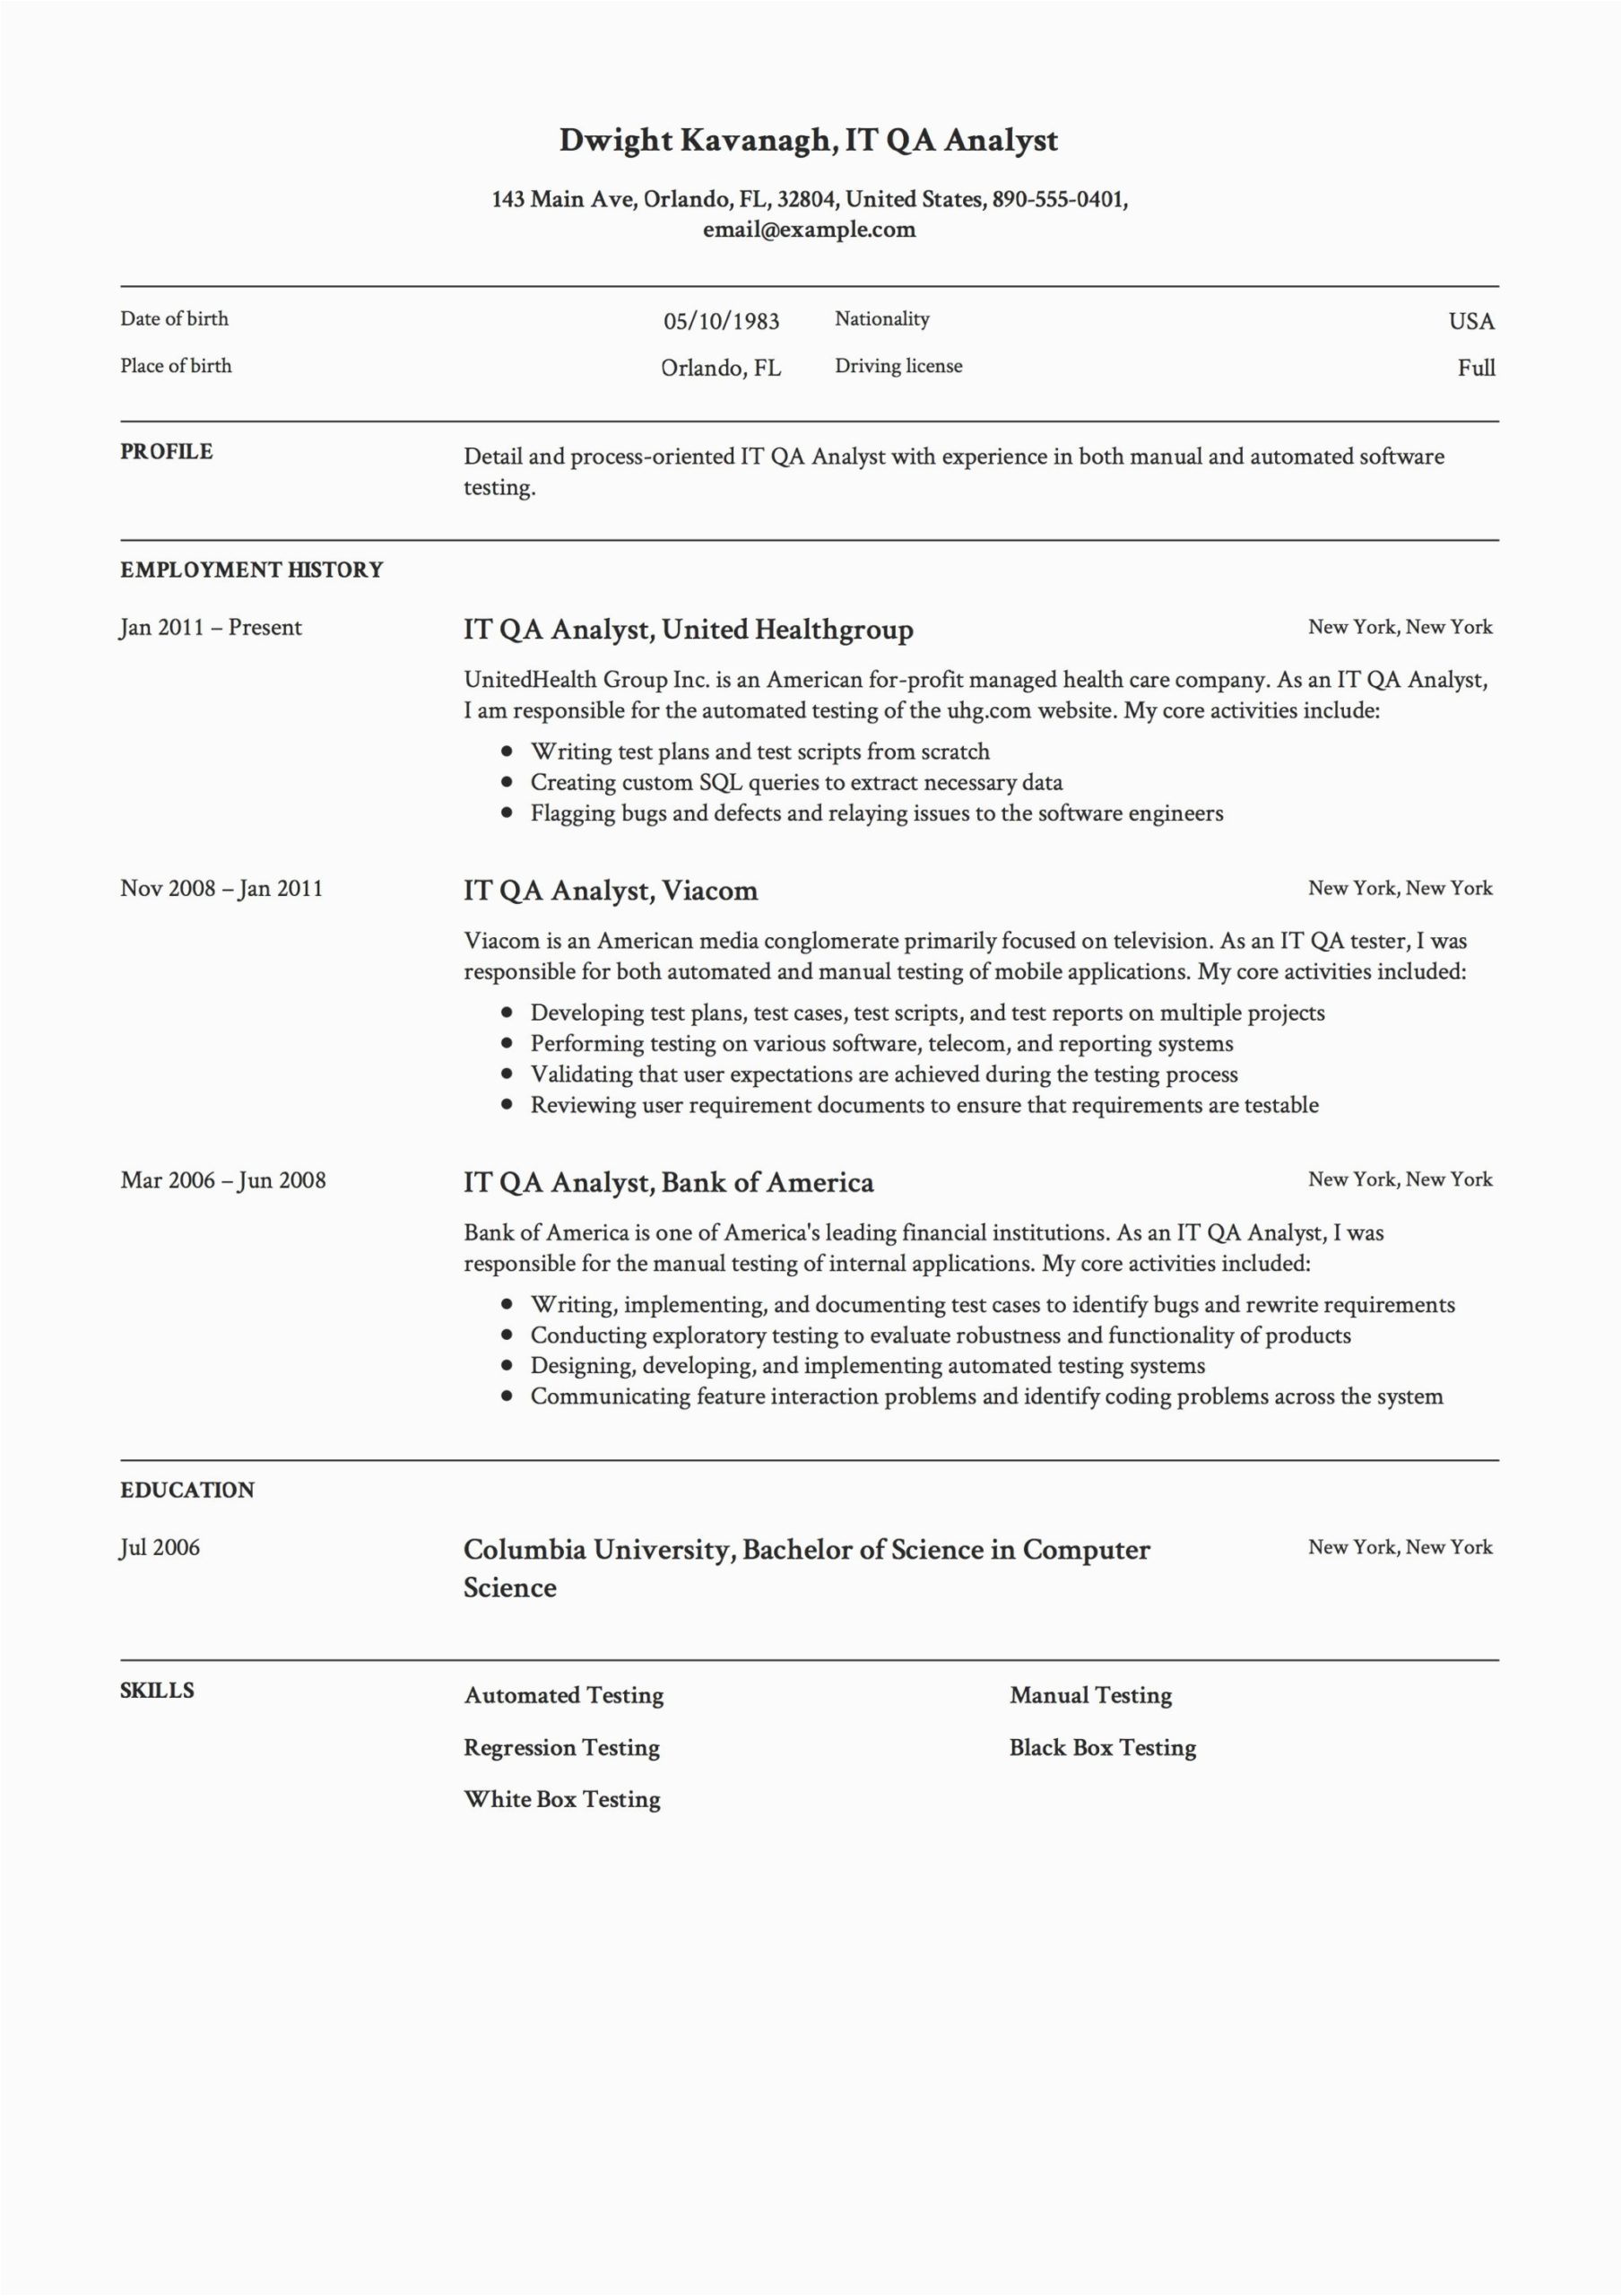 Sample Resume Qa Analyst with Trading Exp It Qa Analyst Resume & Guide 12 Templates Pdf Download